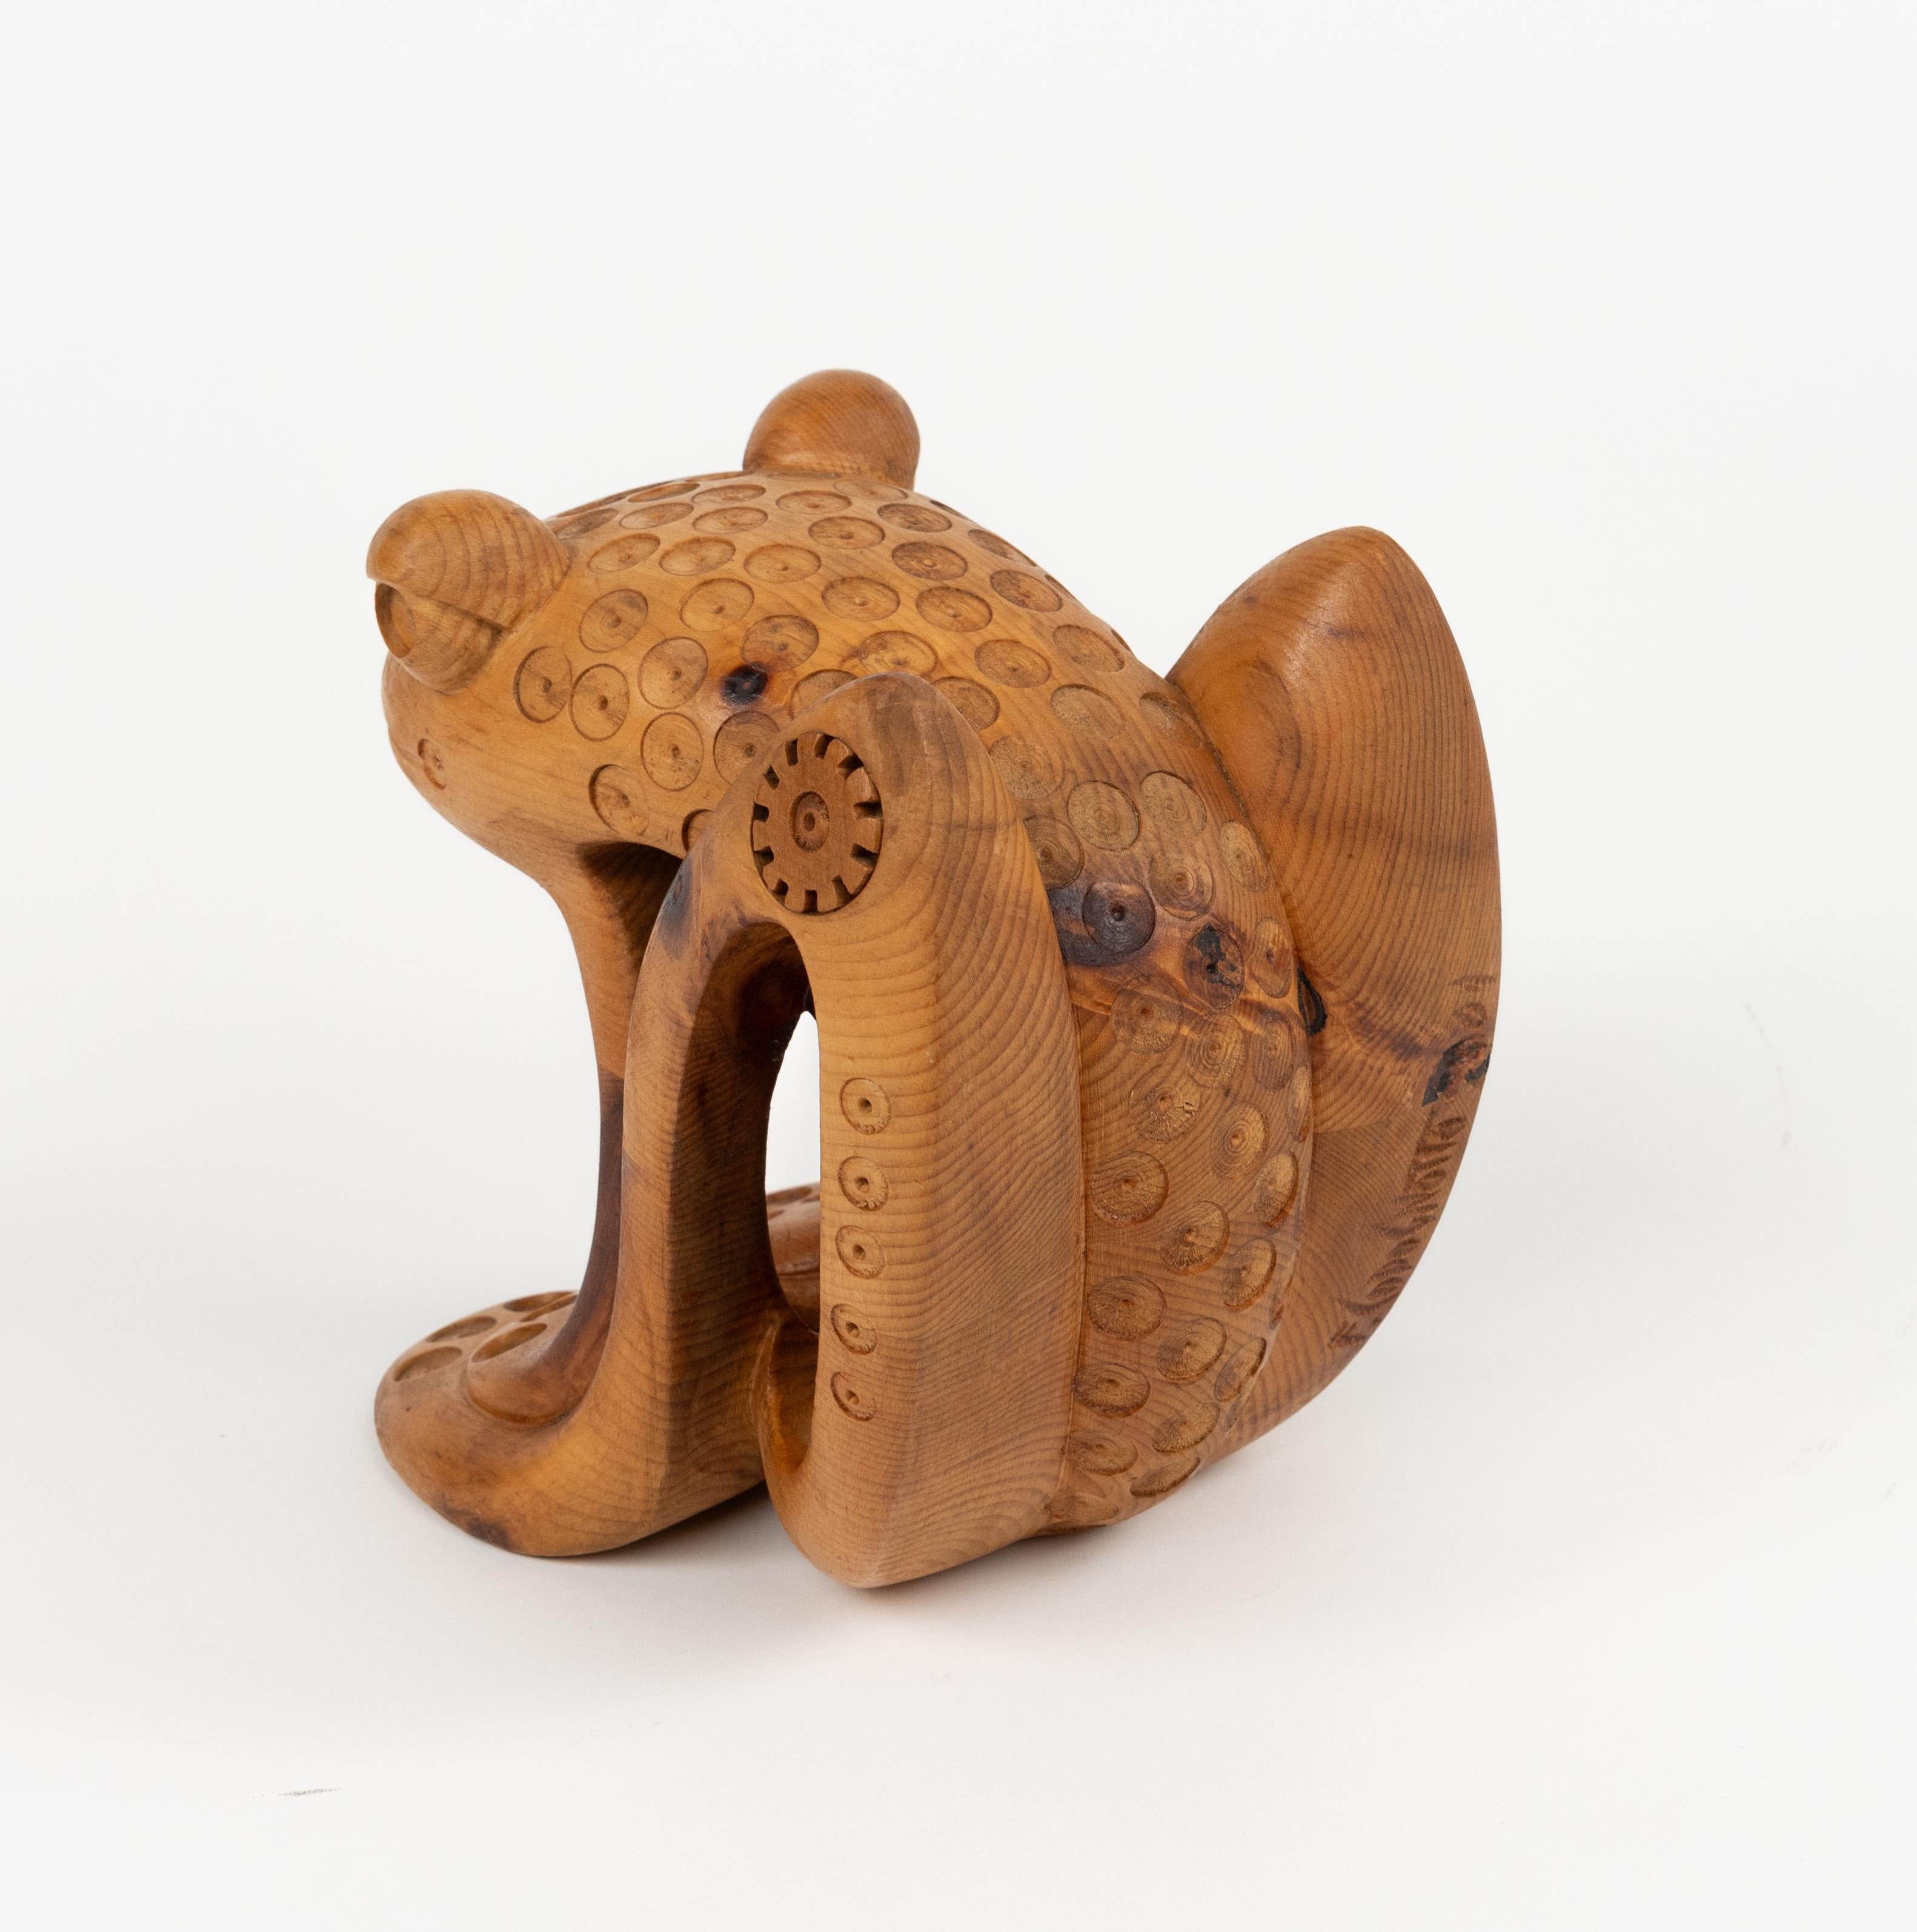 Pine Wood Decorative Sculpture Shape Frog by Ferdinando Codognotto, Italy 2001 For Sale 2